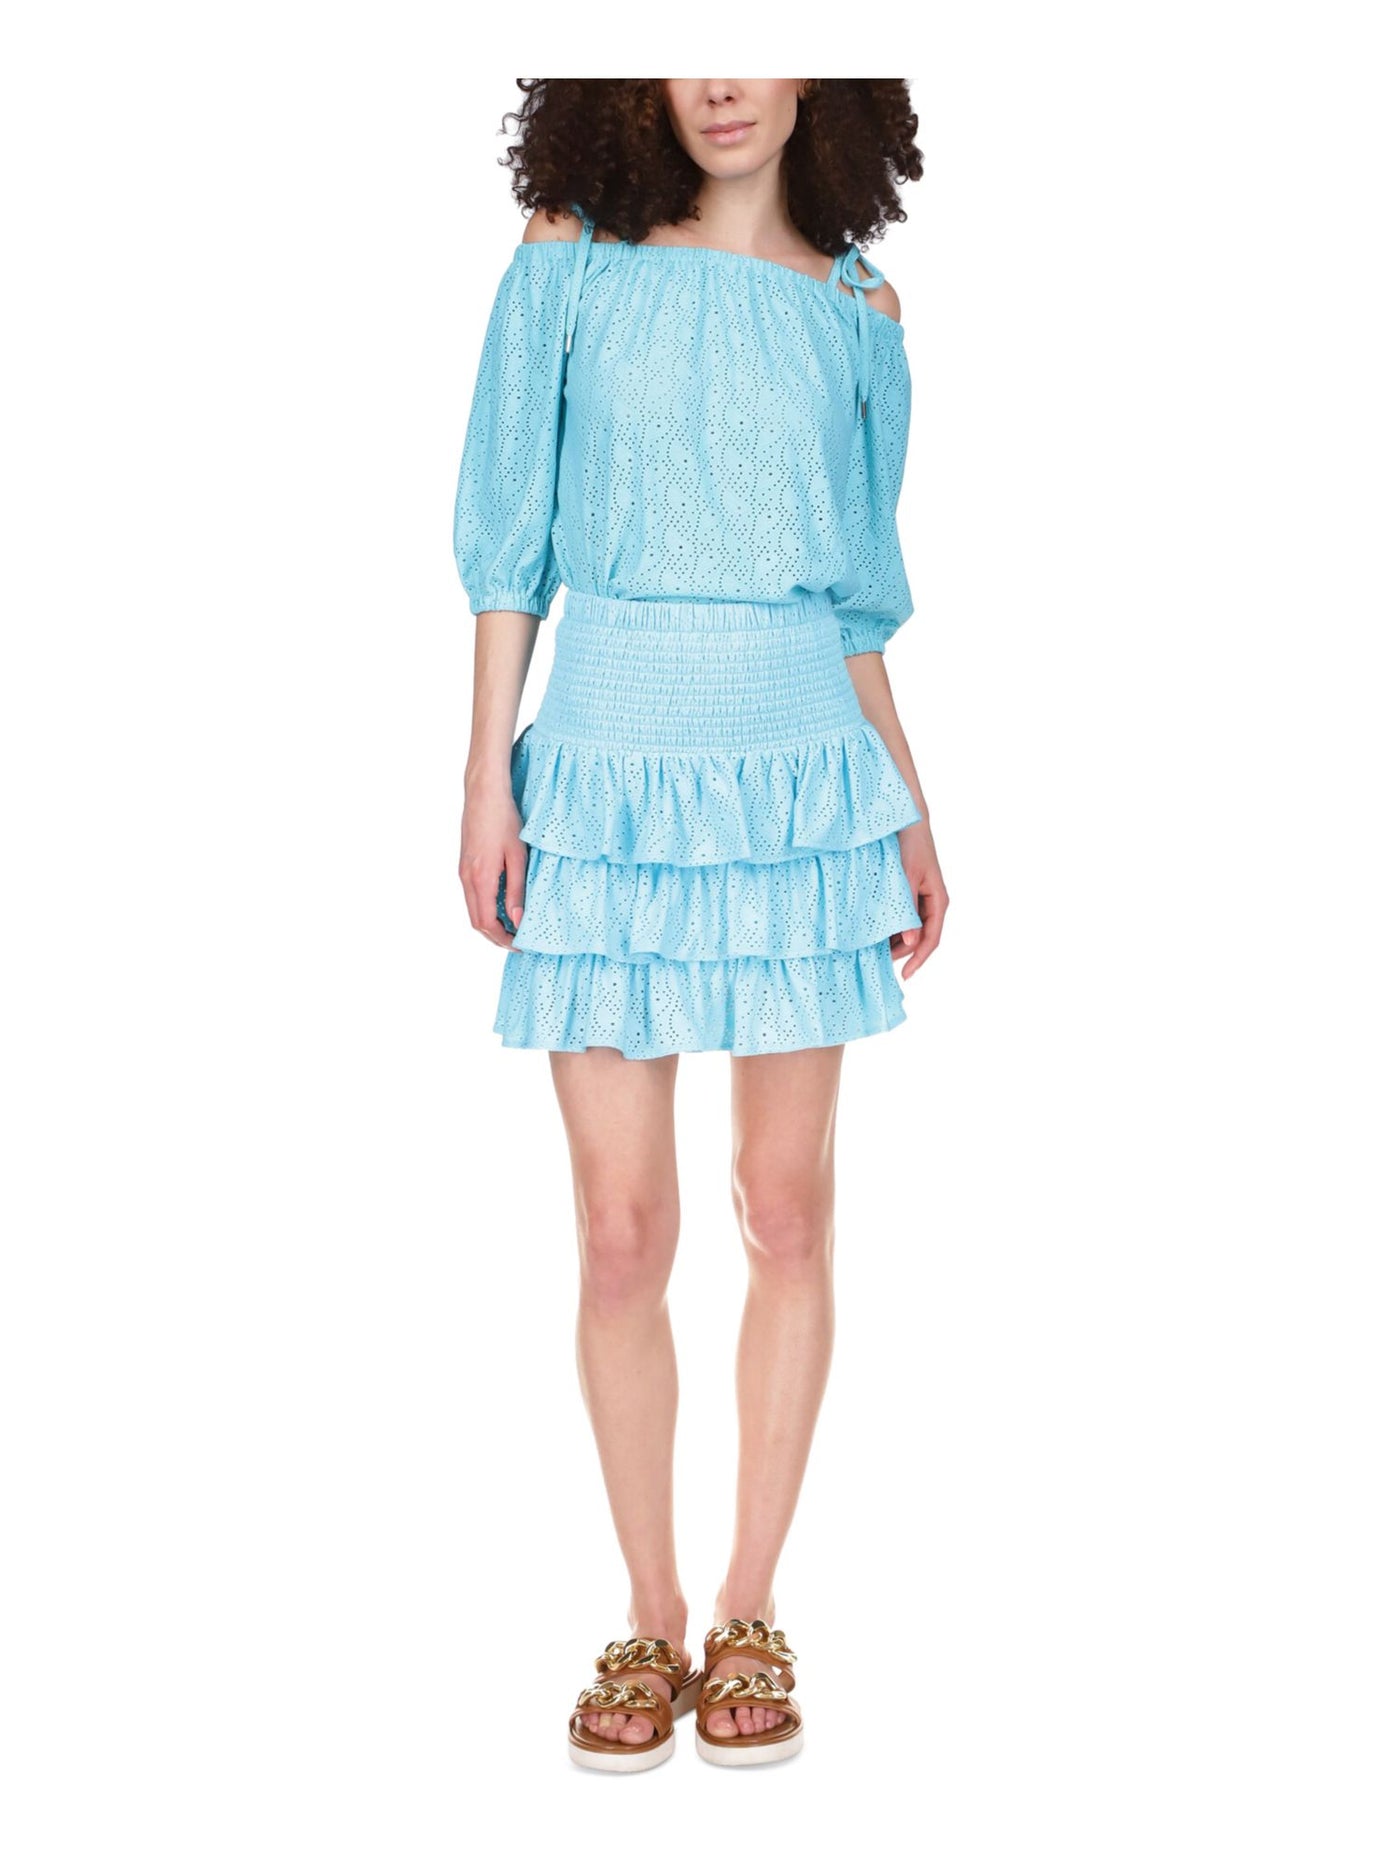 MICHAEL KORS Womens Turquoise Eyelet Smocked Tiered Lined Ruffled Pull On Above The Knee A-Line Skirt XS